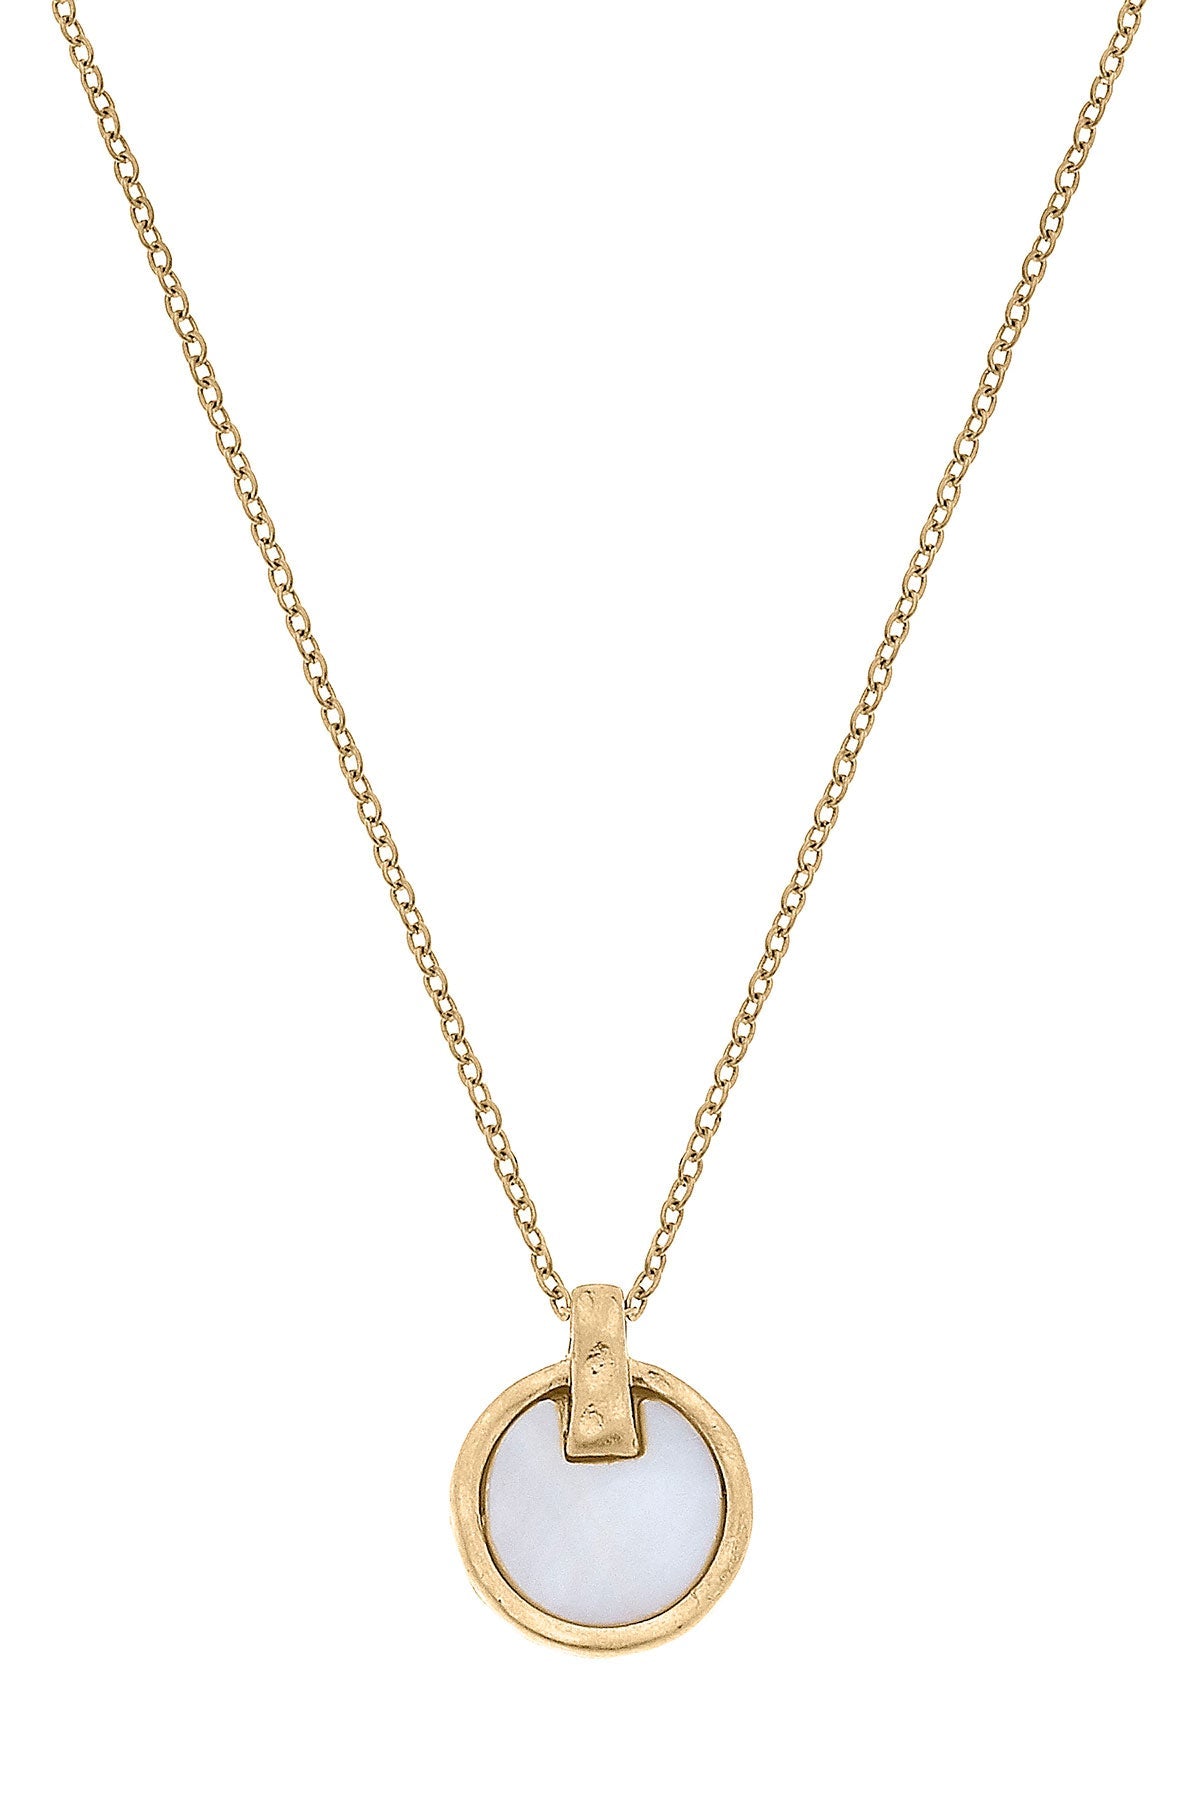 Mariana Pearl Delicate Disc Necklace in Mother of Pearl